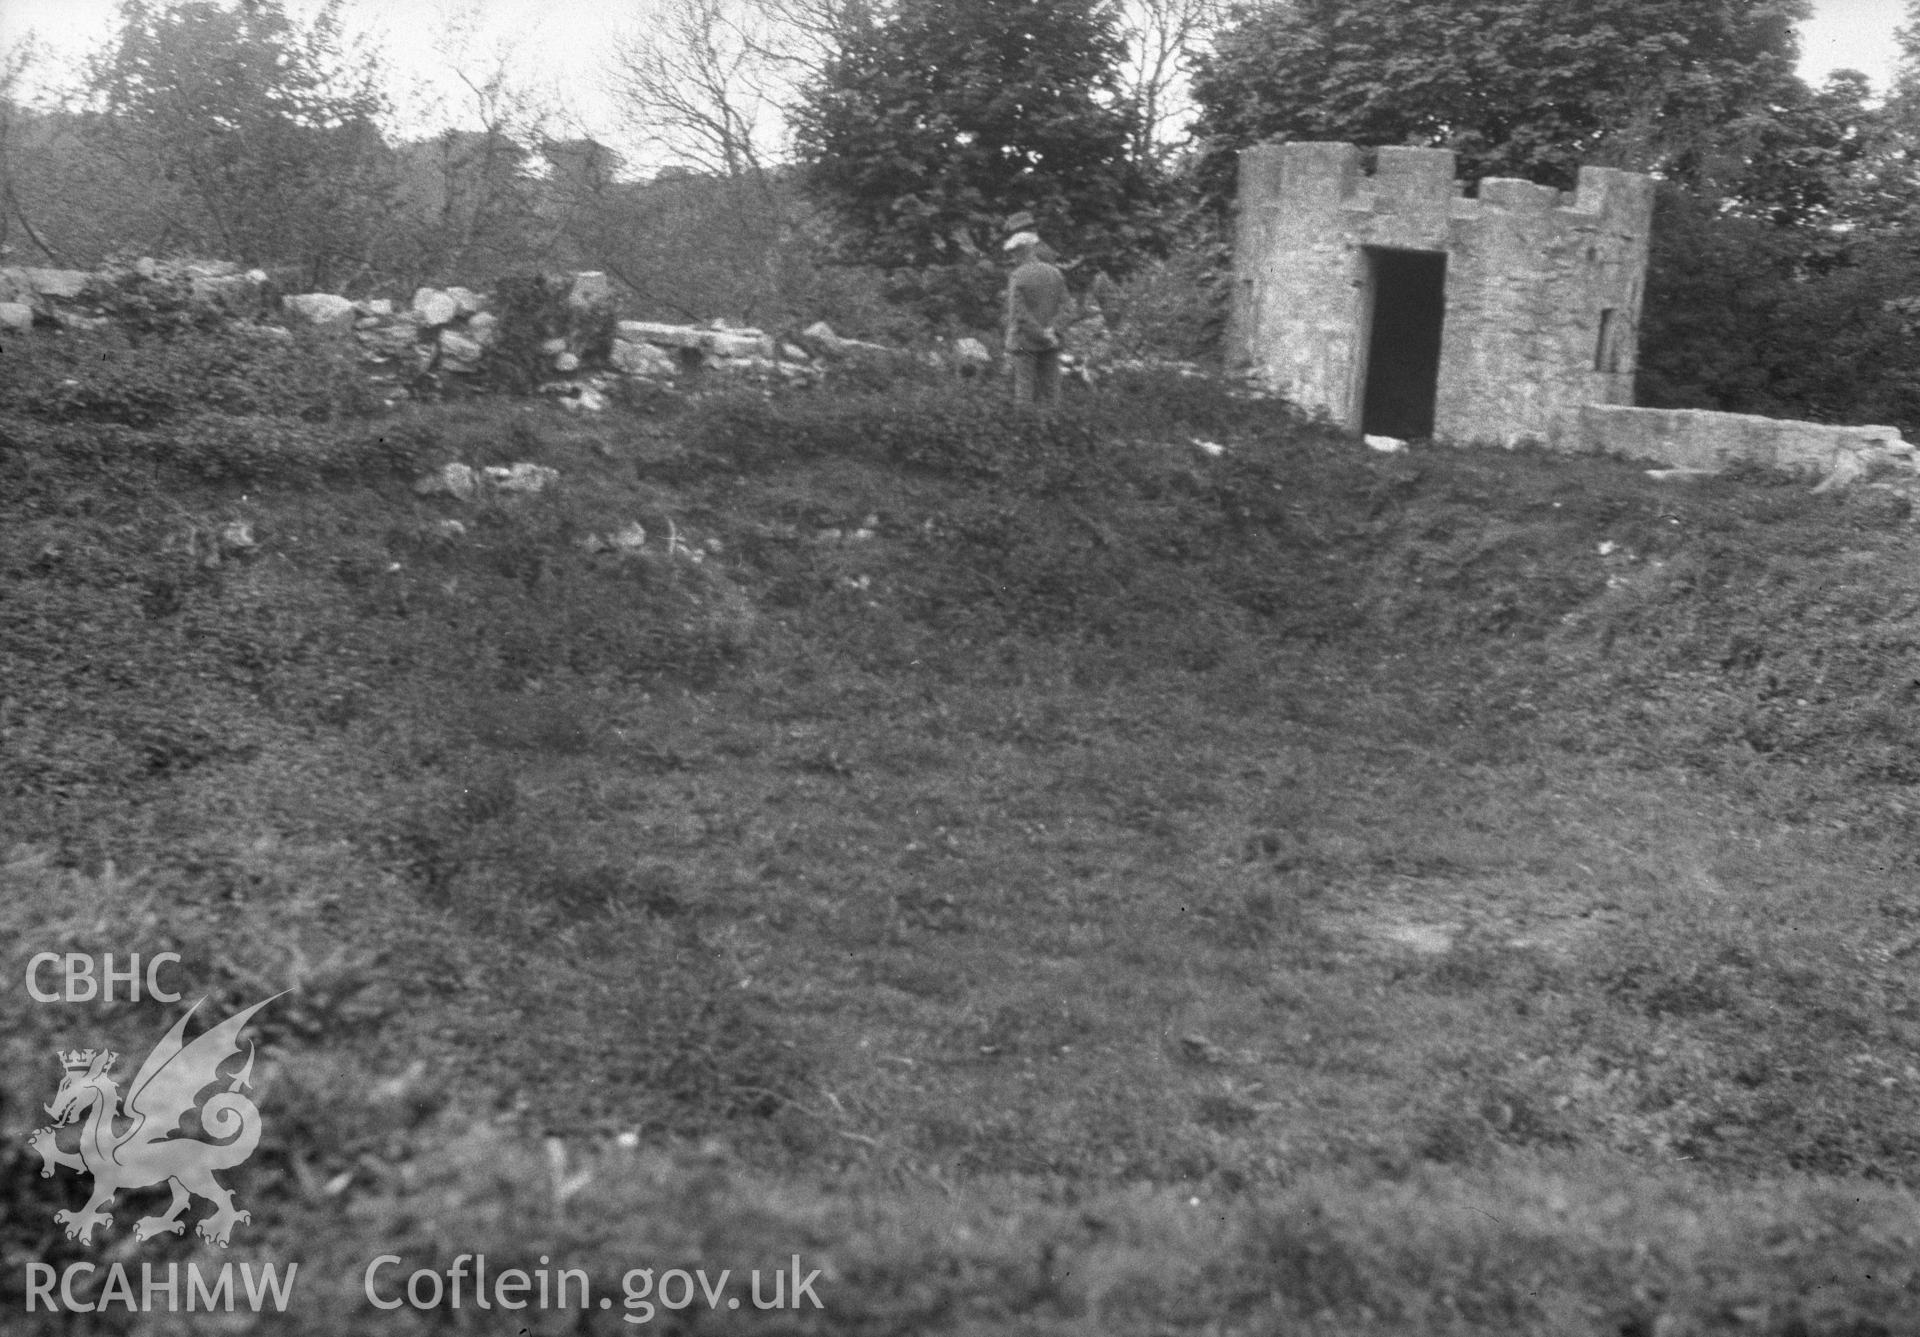 Digital copy of a nitrate negative showing Aber Lleingiog Castle. From Cadw Monuments in Care Collection.